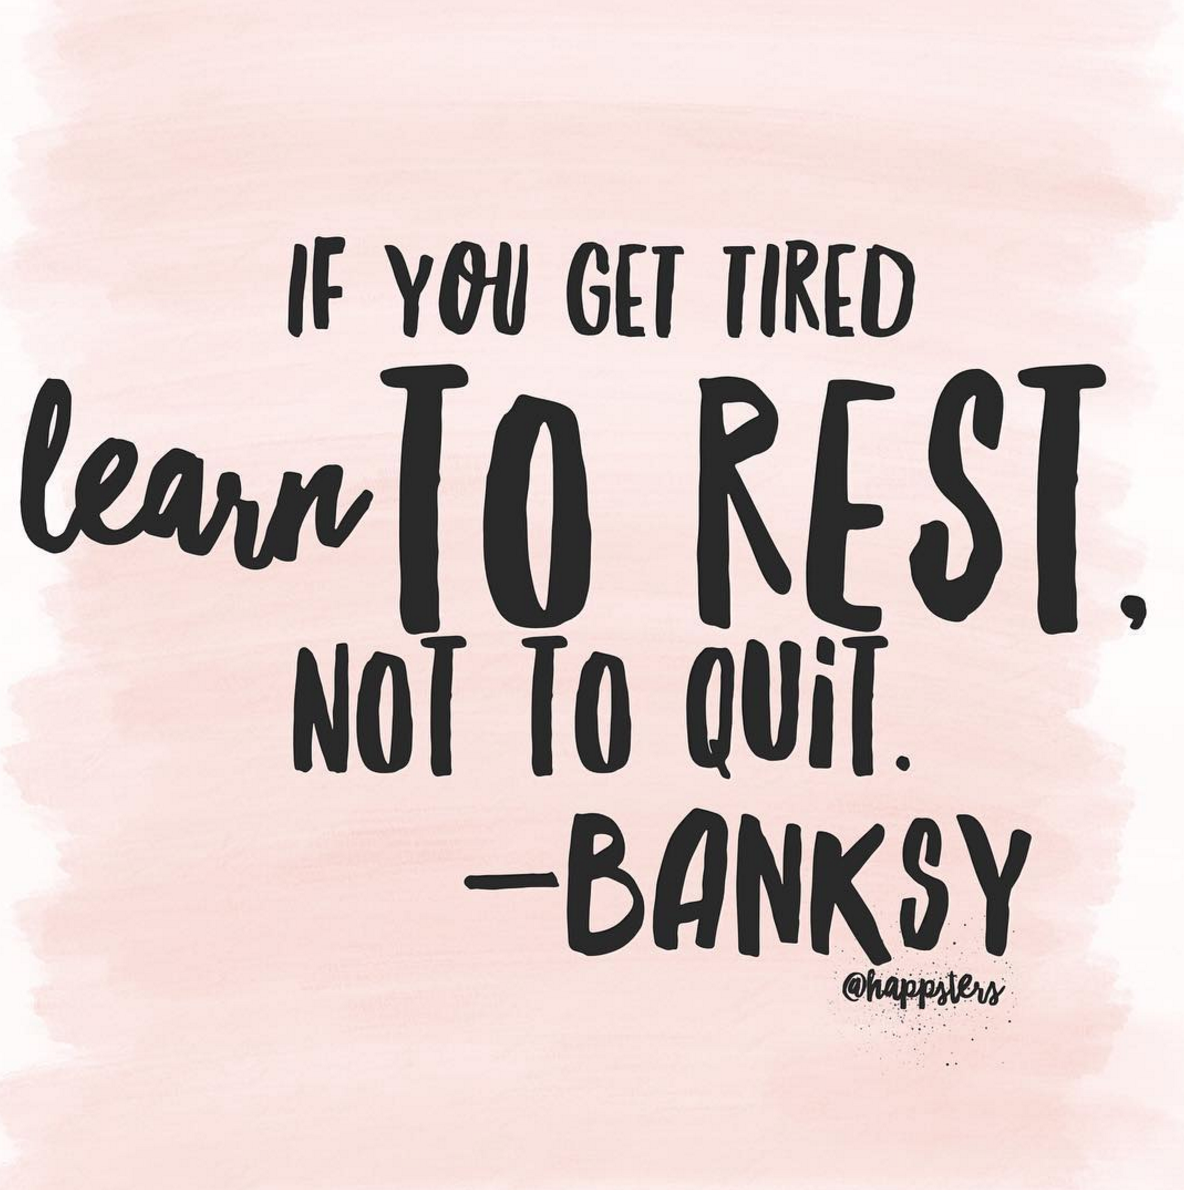 Friday Inspo - Learn to Rest, Not to Quit!